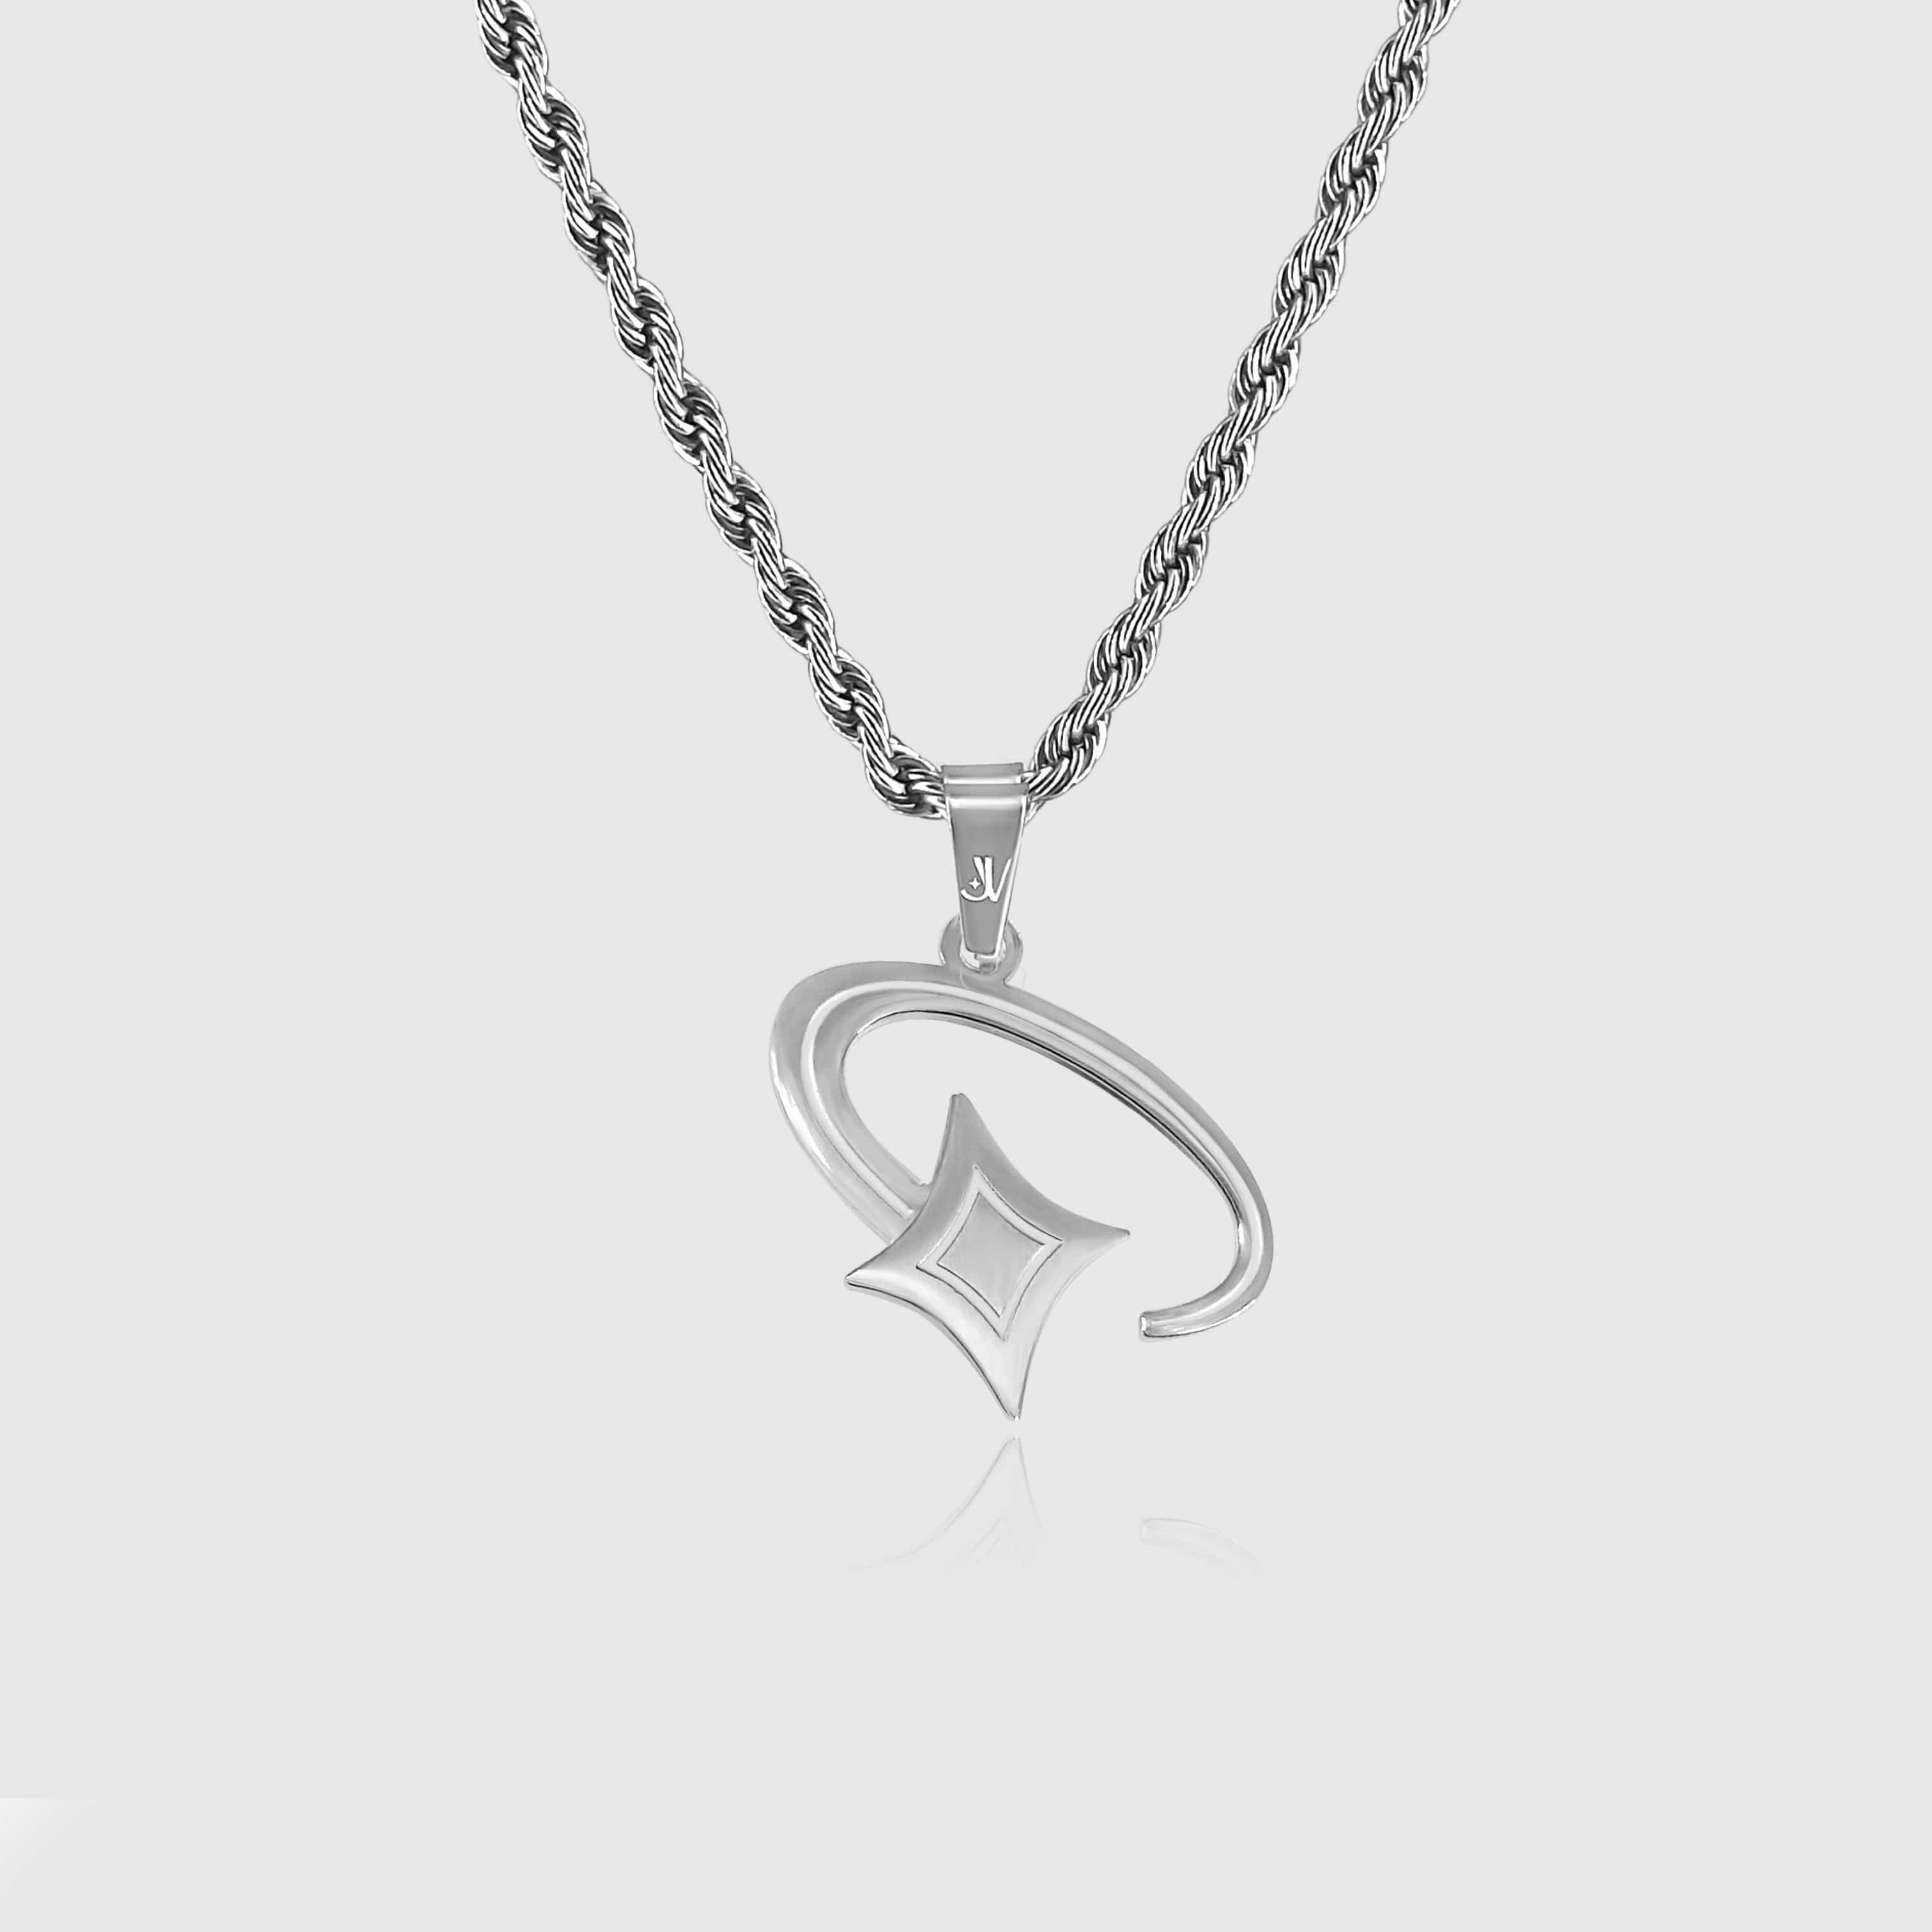 Shooting Star Rope Chain - Silver (3mm) Chain with Pendant JVILLION